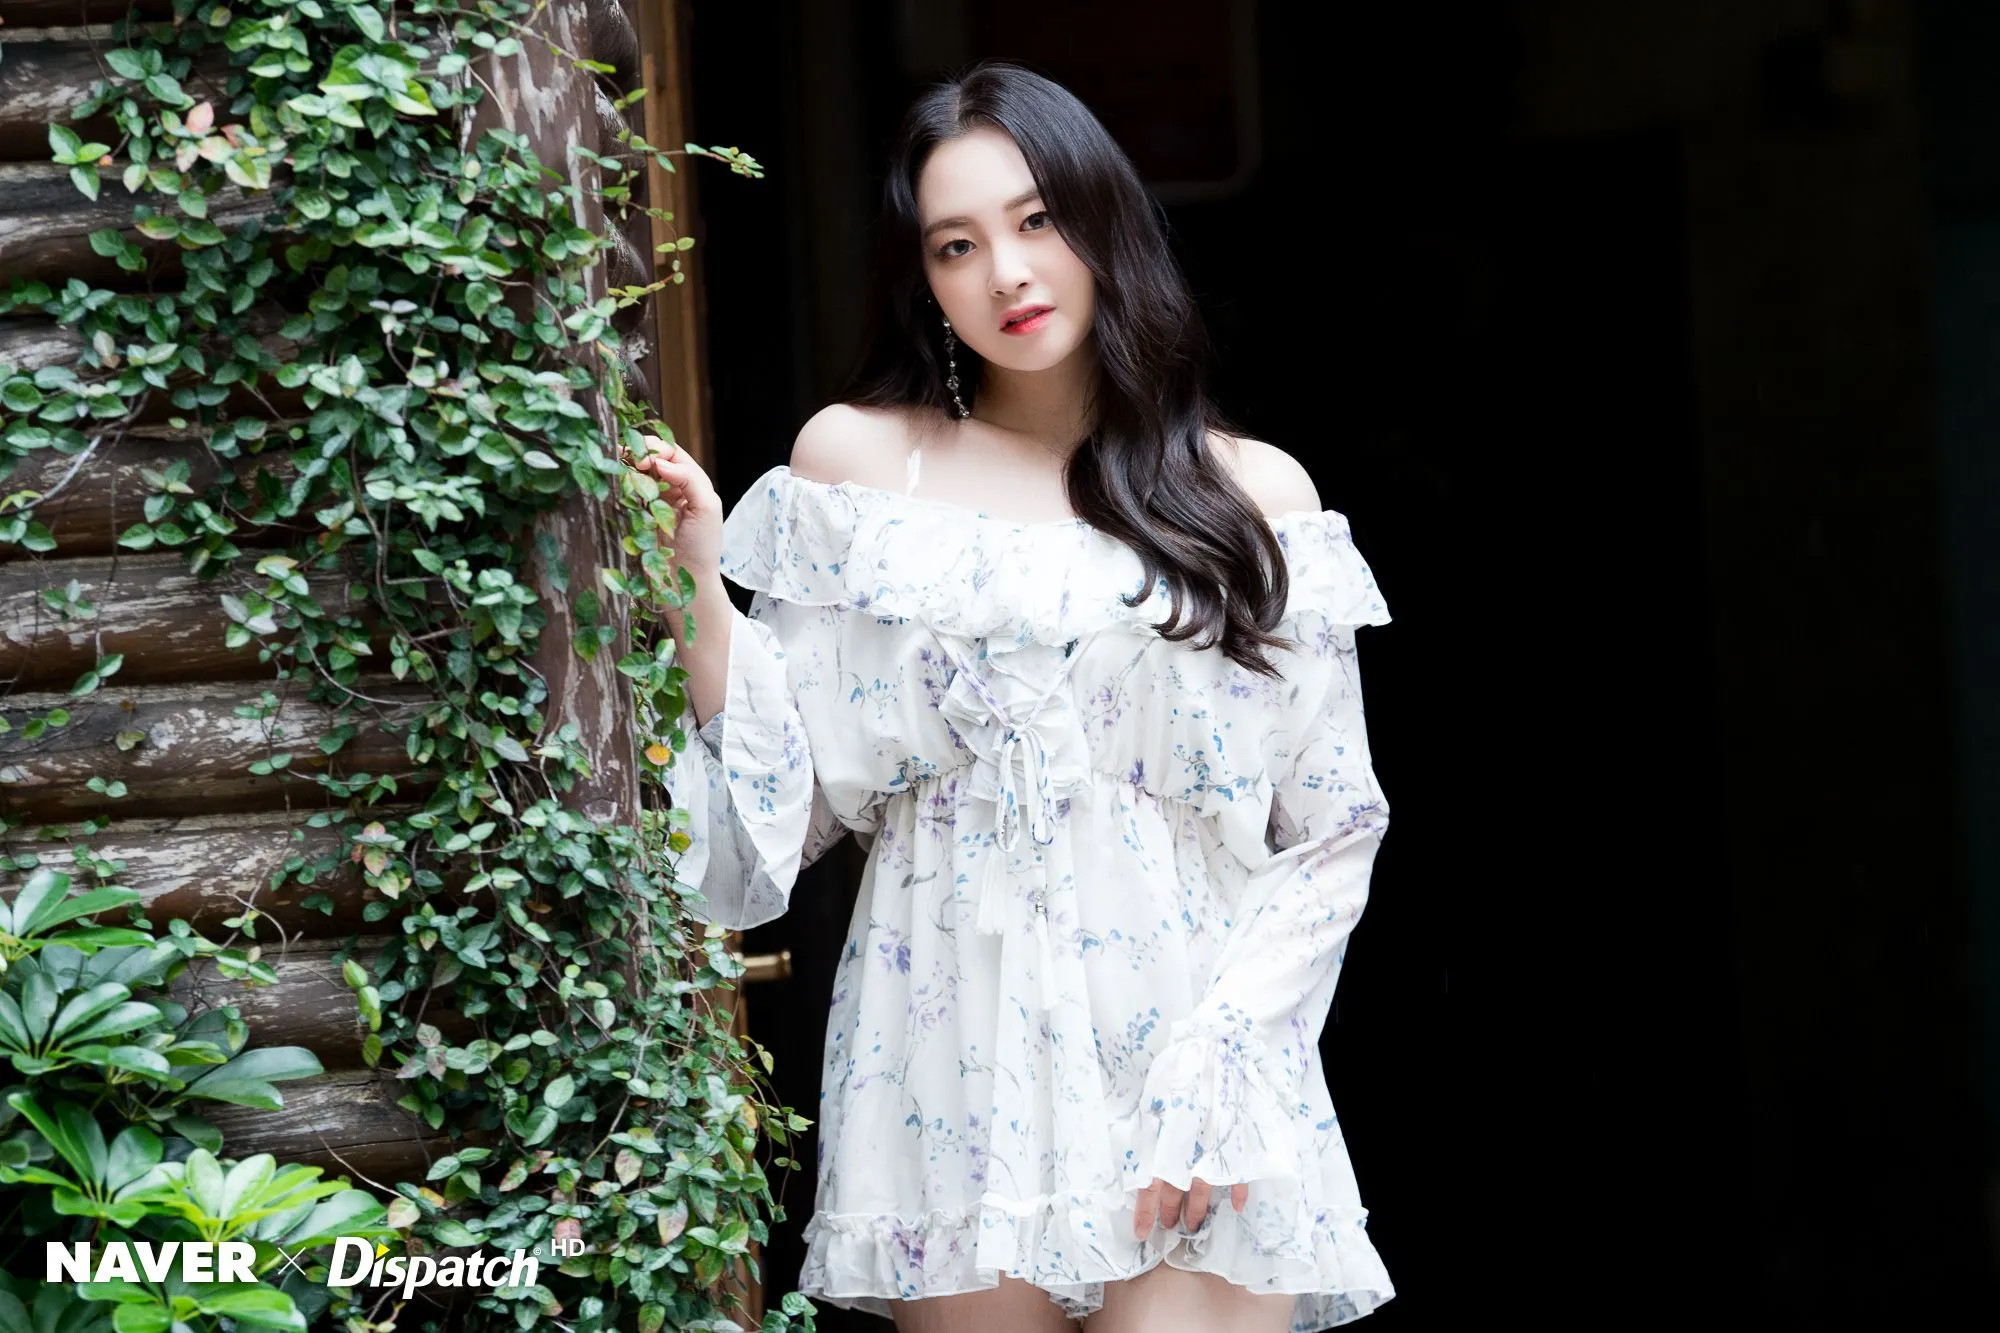 MOMOLAND Taeha - Japan promotion photoshoot by Naver x Dispatch | Kpopping